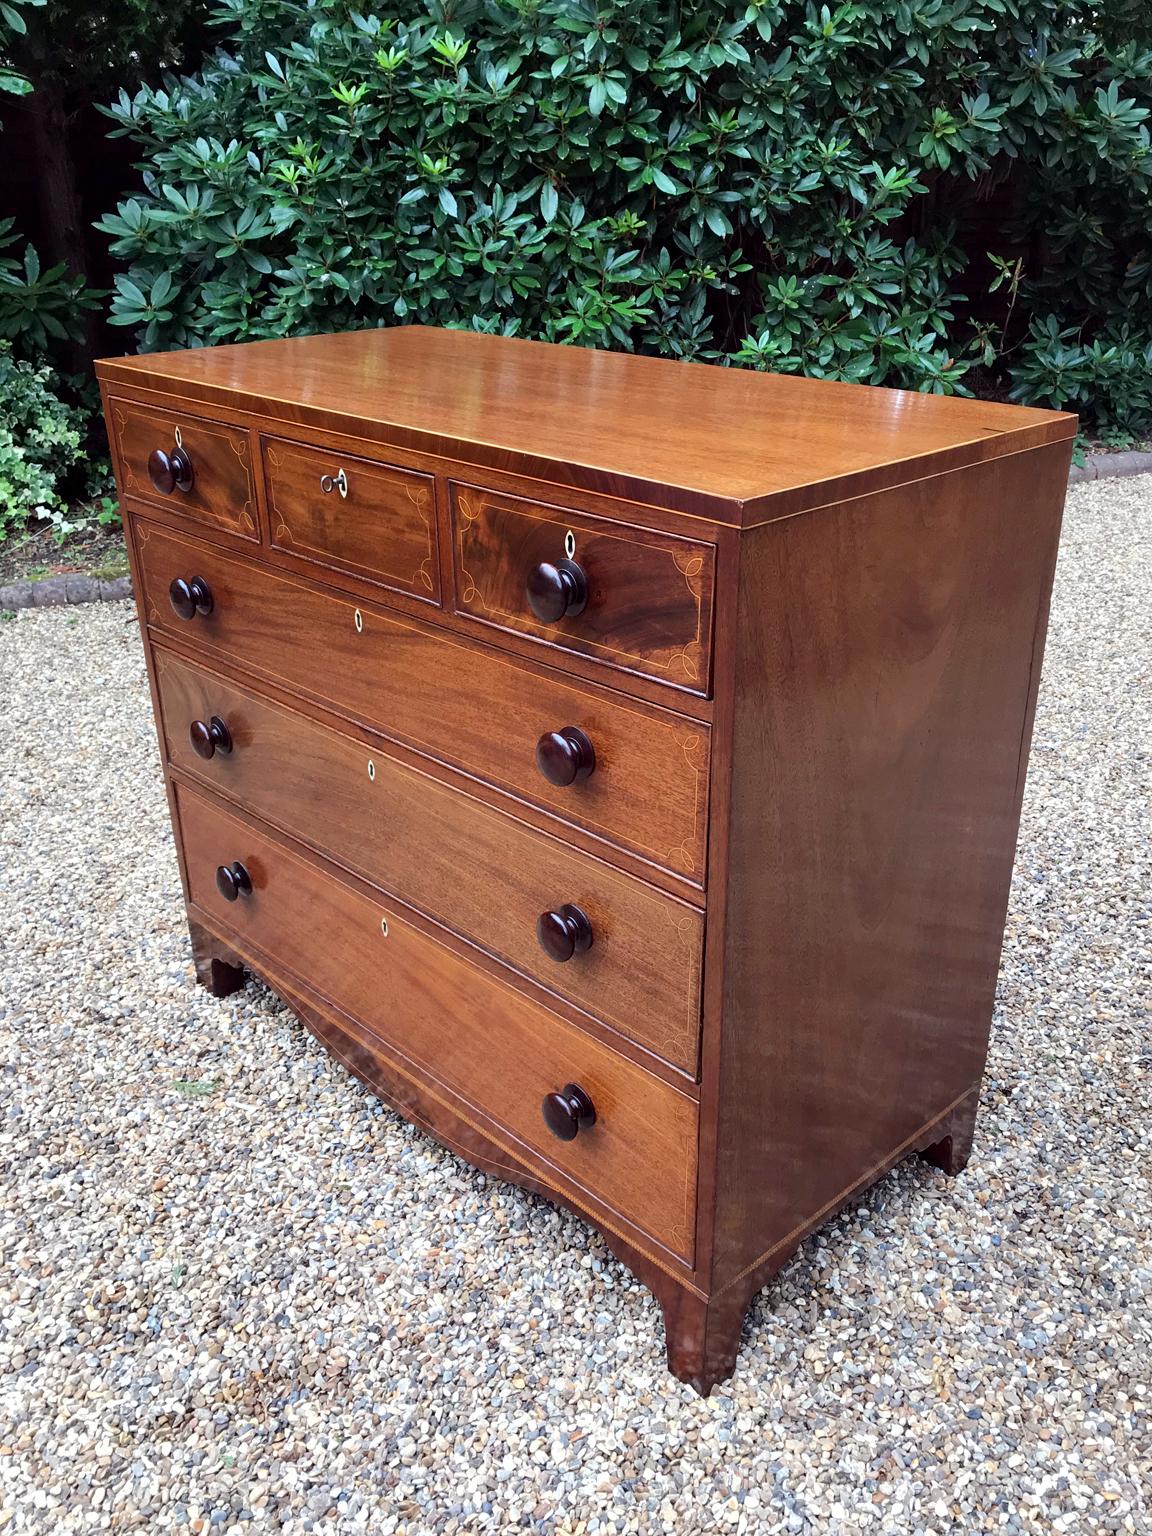 19th Century Regency Mahogany Inlaid Chest of Drawers In Good Condition For Sale In Richmond, London, Surrey